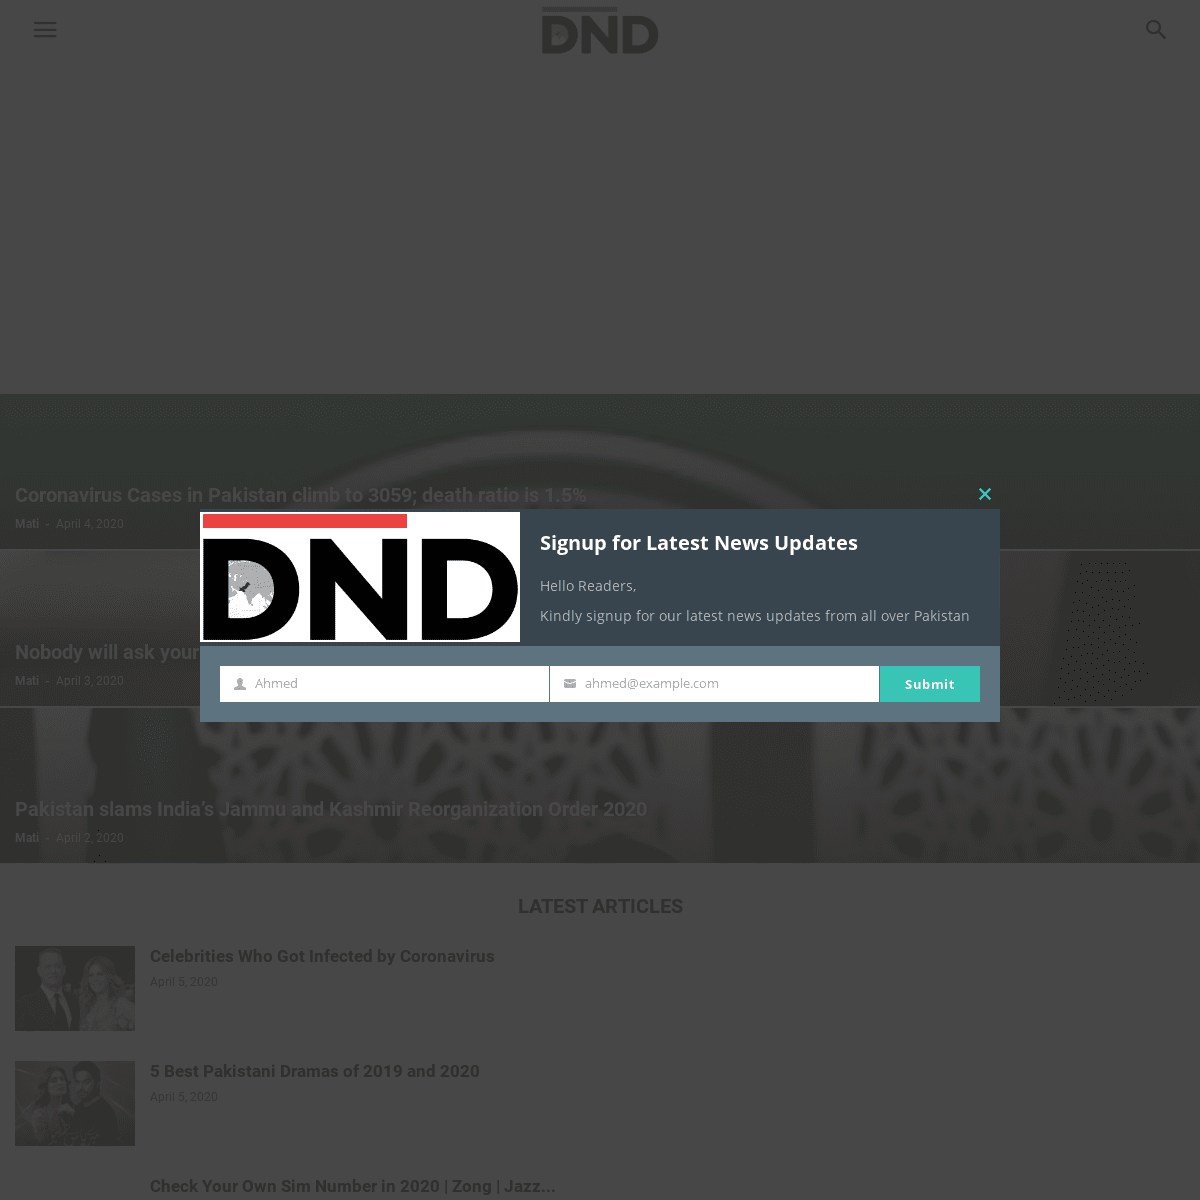 A complete backup of dnd.com.pk